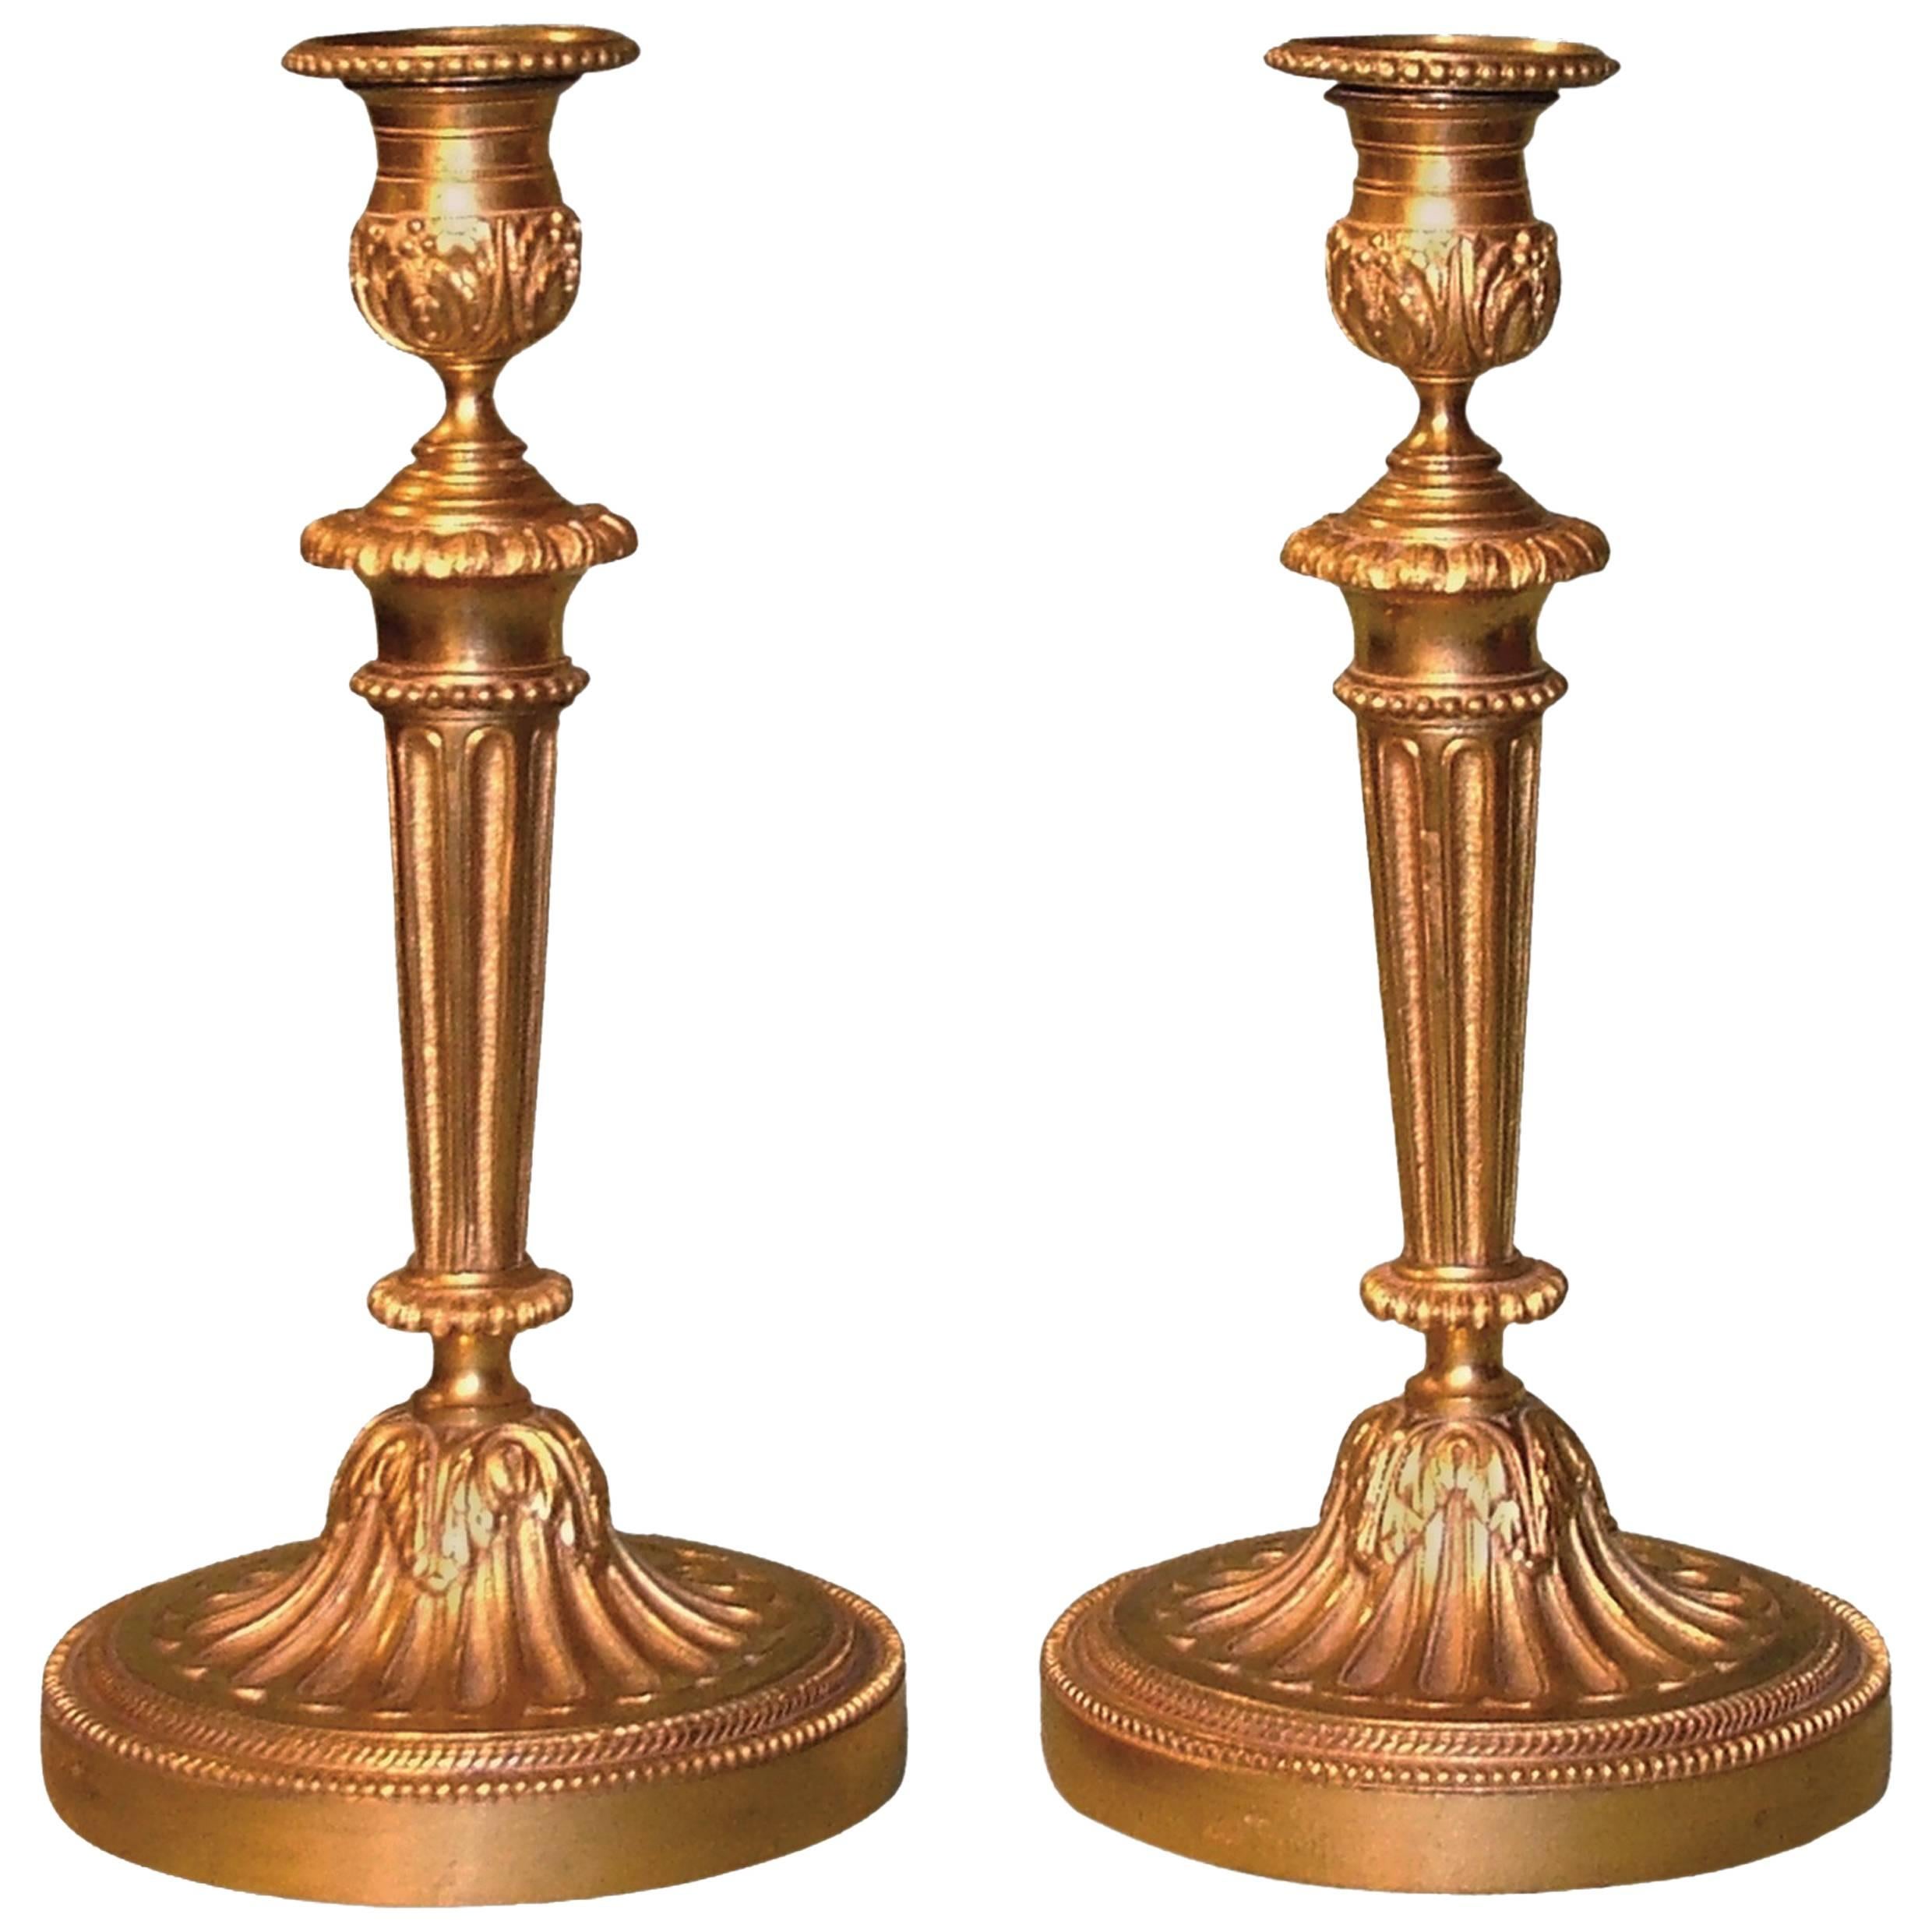 Antique Pair of French Louis XV Style Ormolu Candlesticks